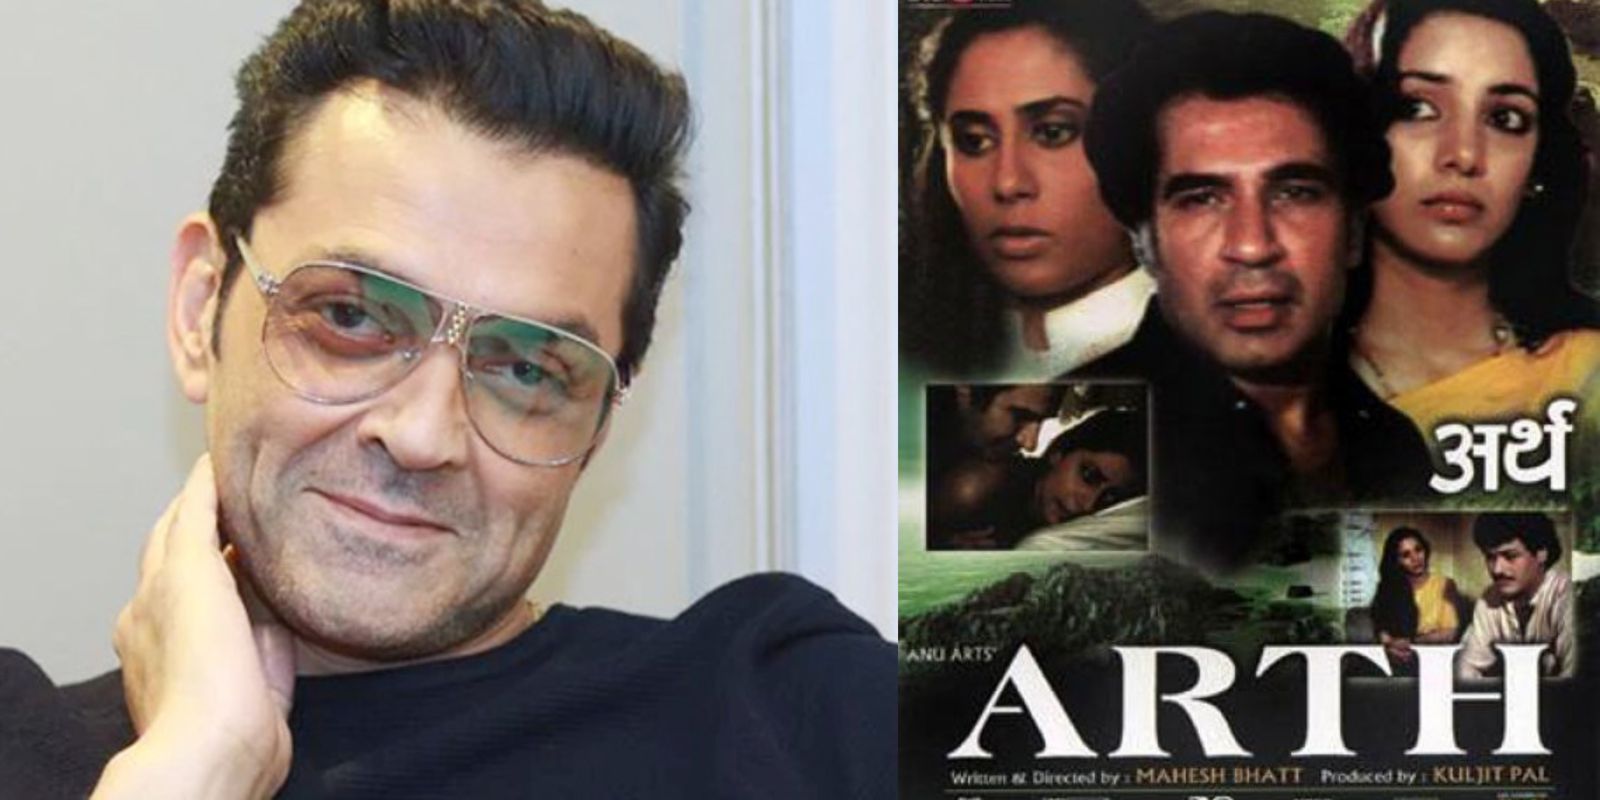 Arth Remake: Bobby Deol To Reprise Kulbhushan Kharbanda's Role? Here's What The Producers Have To Say